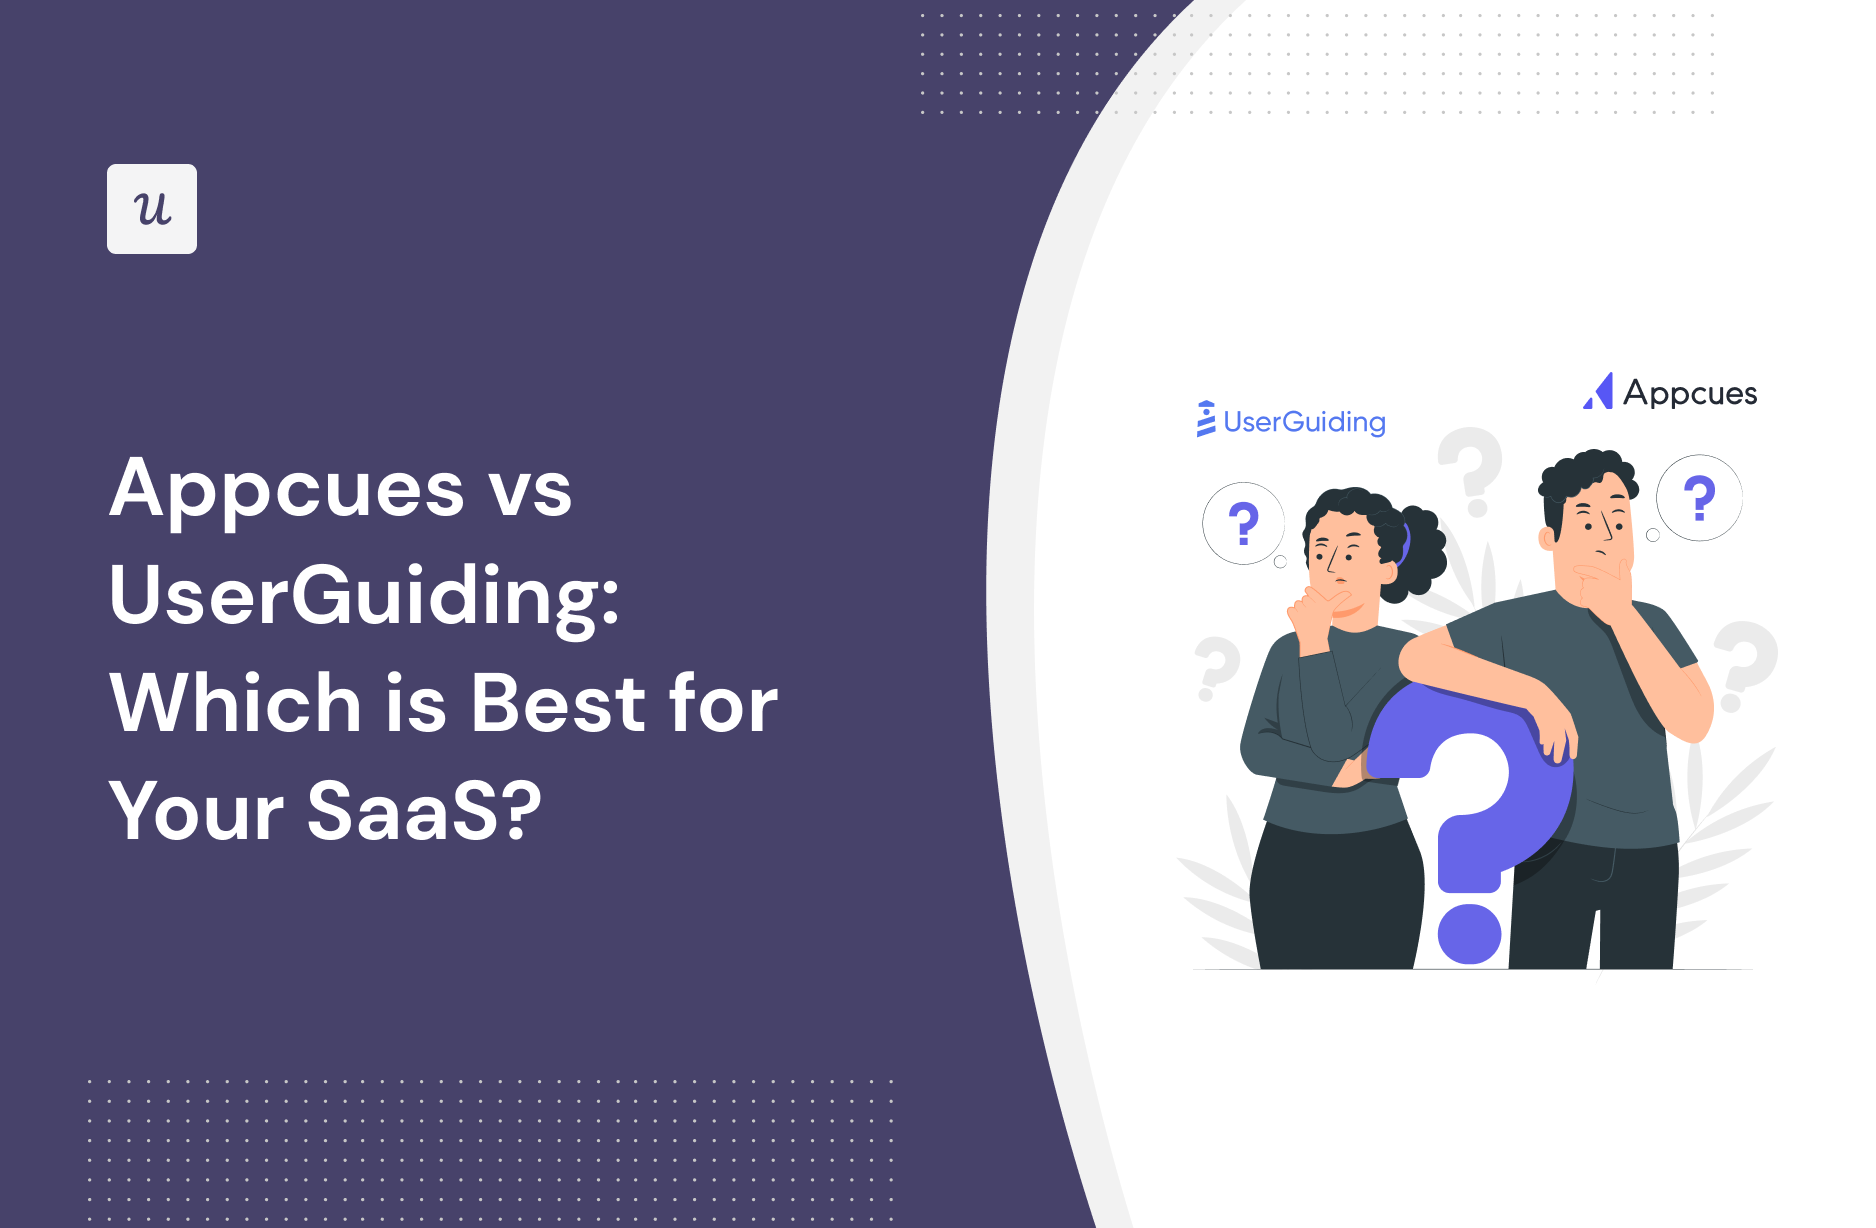 Appcues vs UserGuiding: Which is Best for your SaaS?